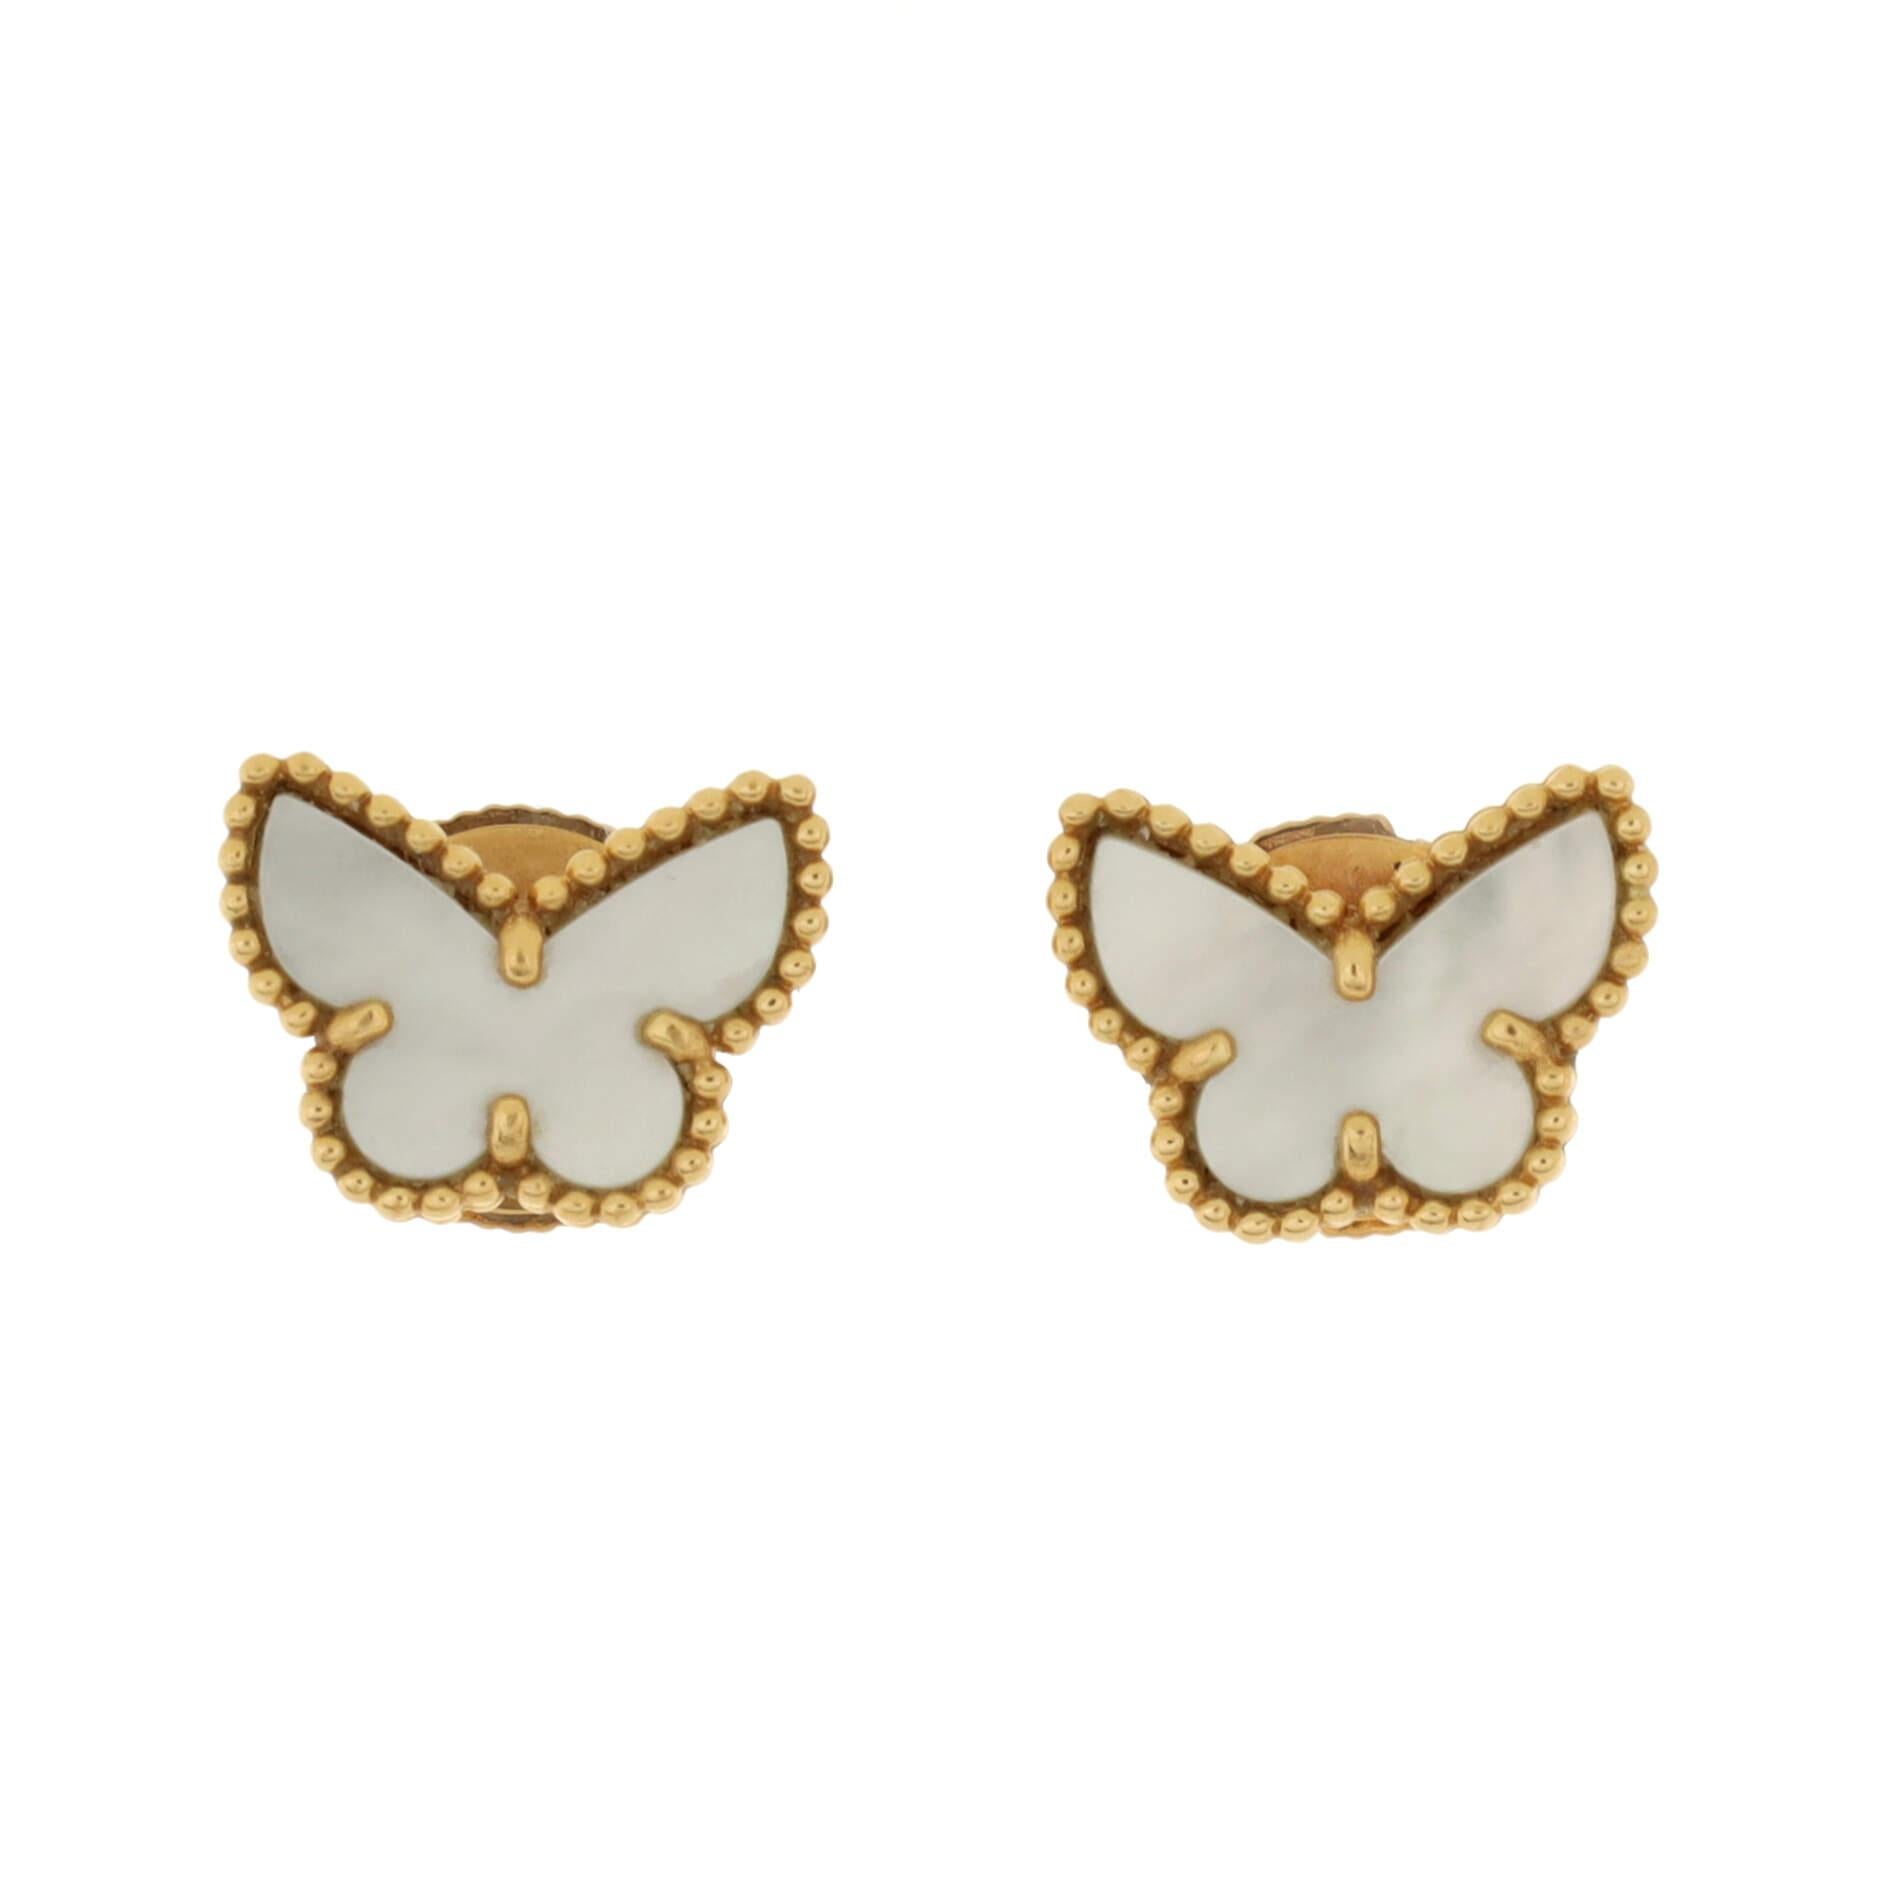 Condition: Very good. Moderate wear throughout.
Accessories: Box
Measurements: Height/Length: 8.25 mm, Width: 10.80 mm
Designer: Van Cleef & Arpels
Model: Sweet Alhambra Butterfly Stud Earrings 18K Yellow Gold and Mother of Pearl
Exterior Material: